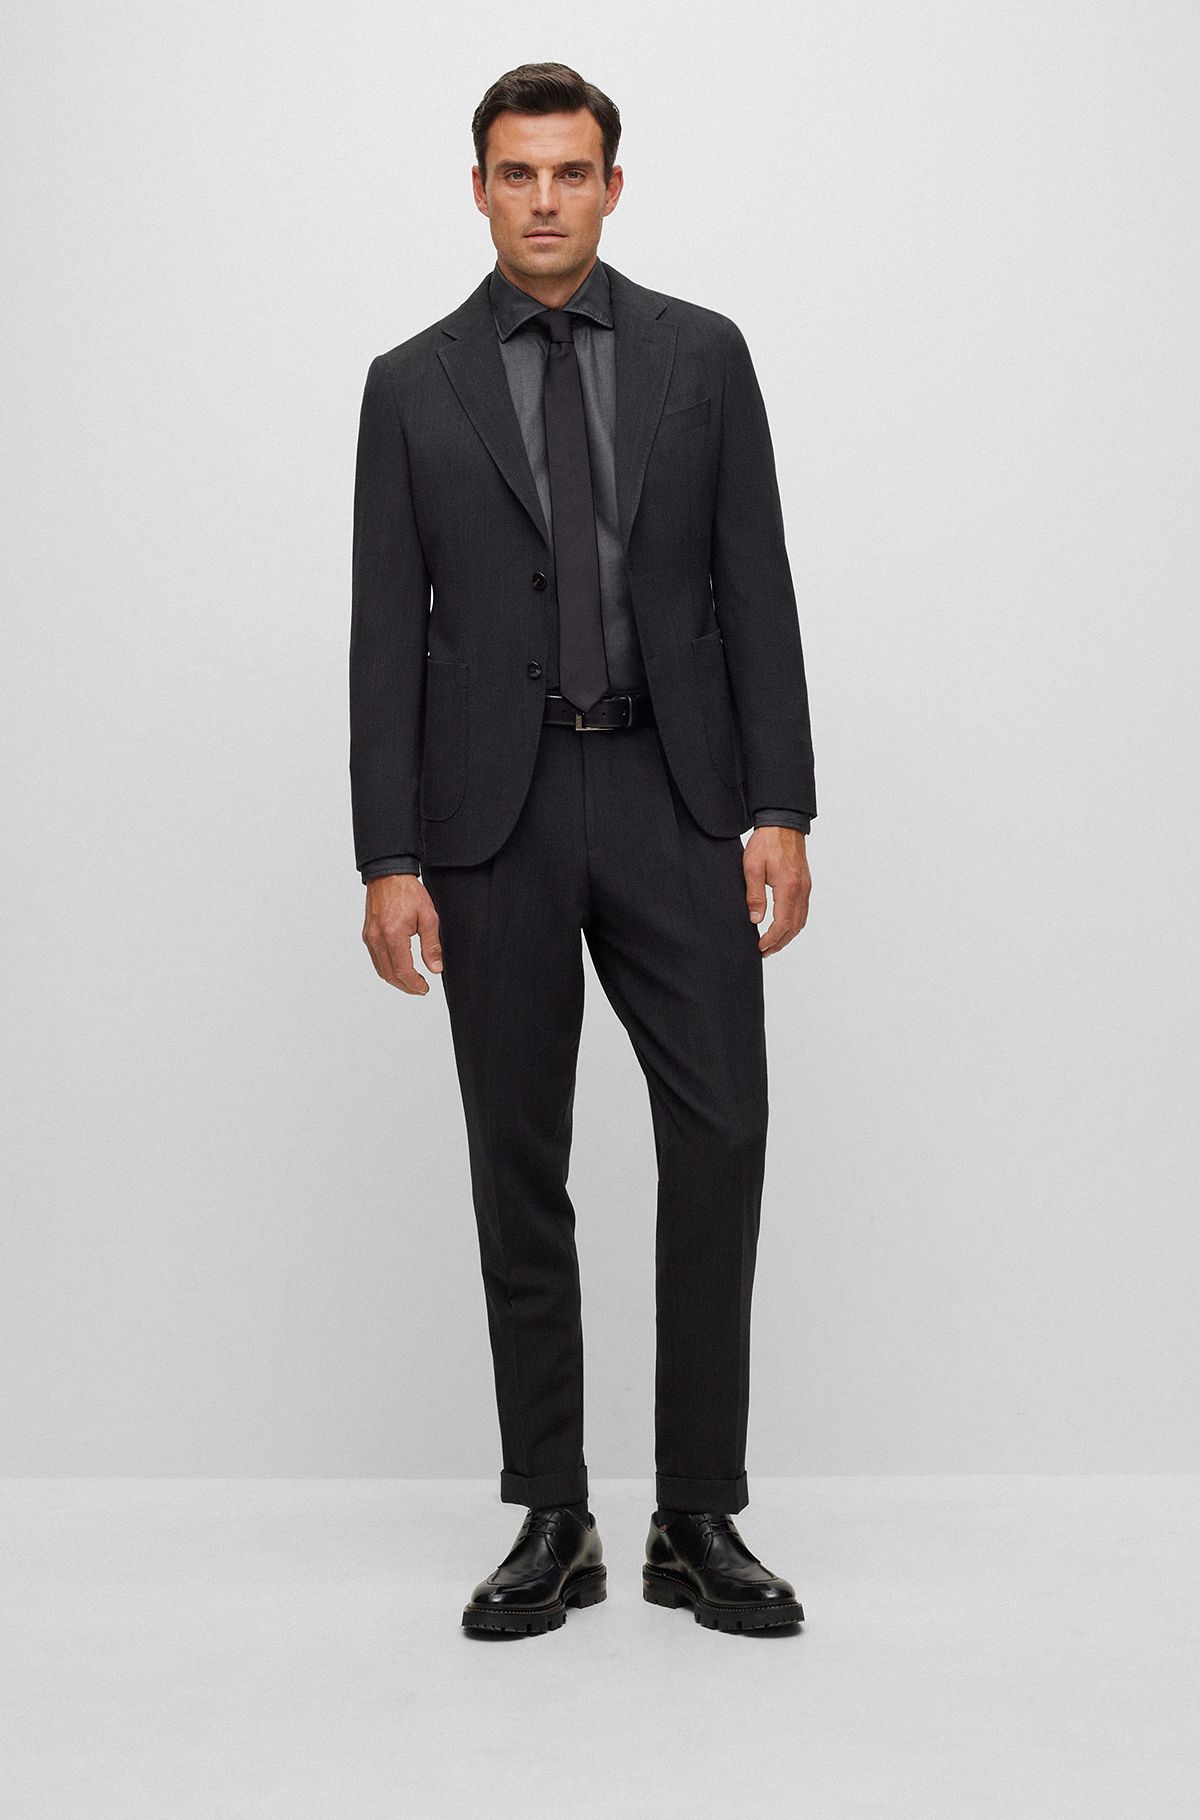 Suits in Black by HUGO BOSS